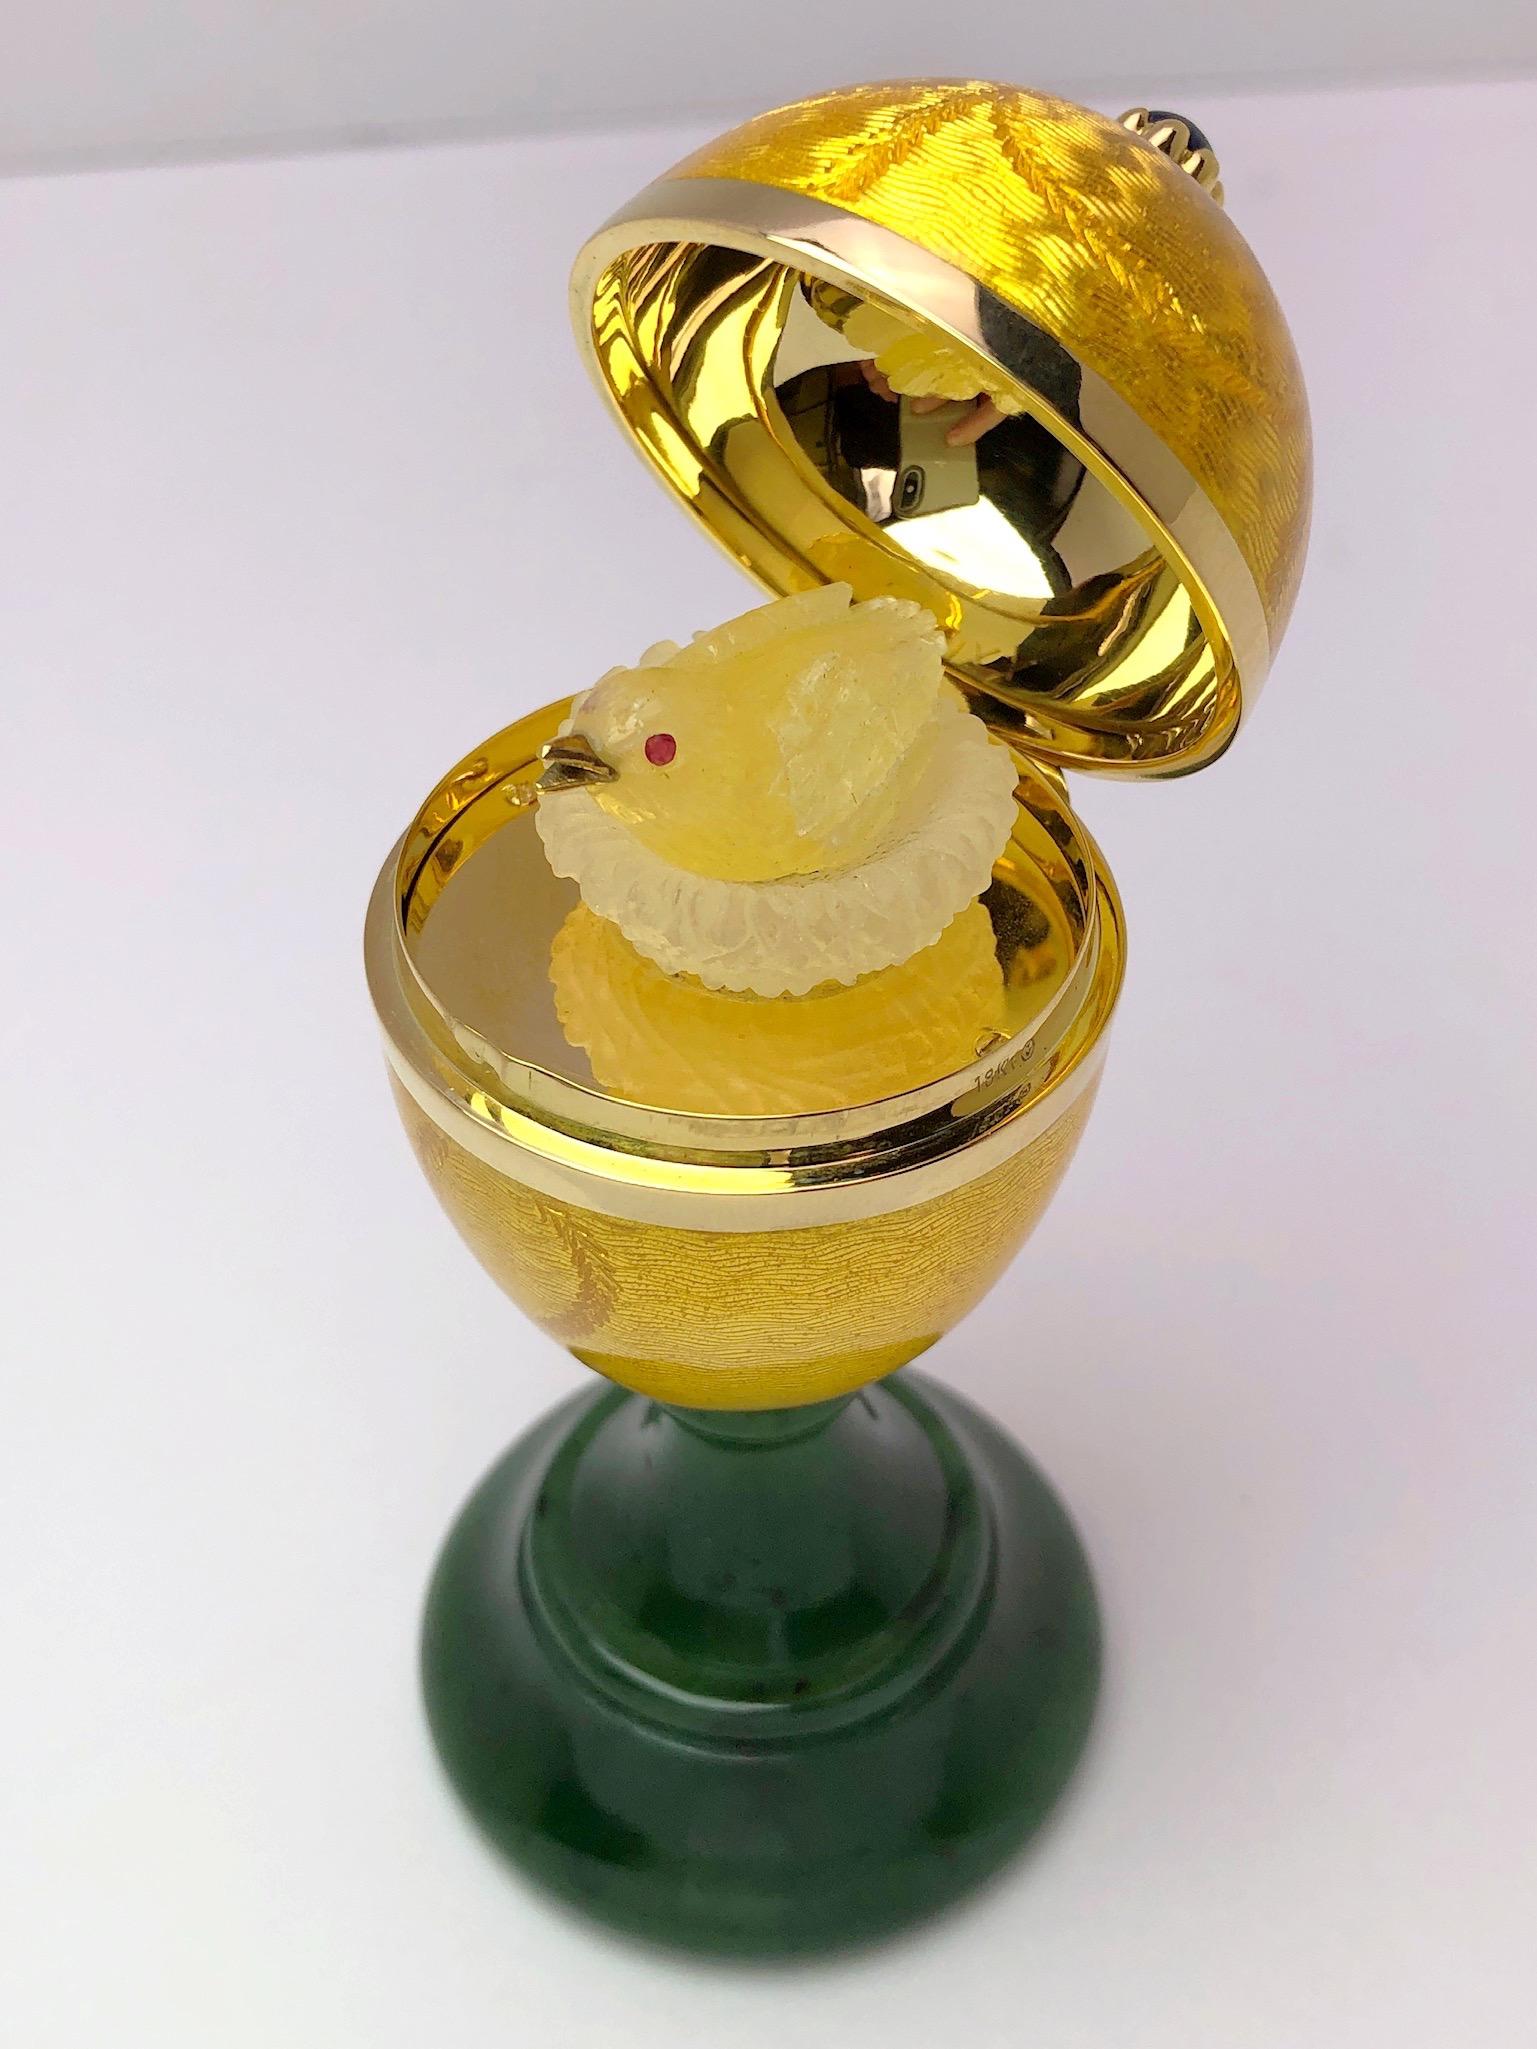 Modern Faberge Enamel and Yellow Gold Ltd. Edition Surprise Egg with Chick 2